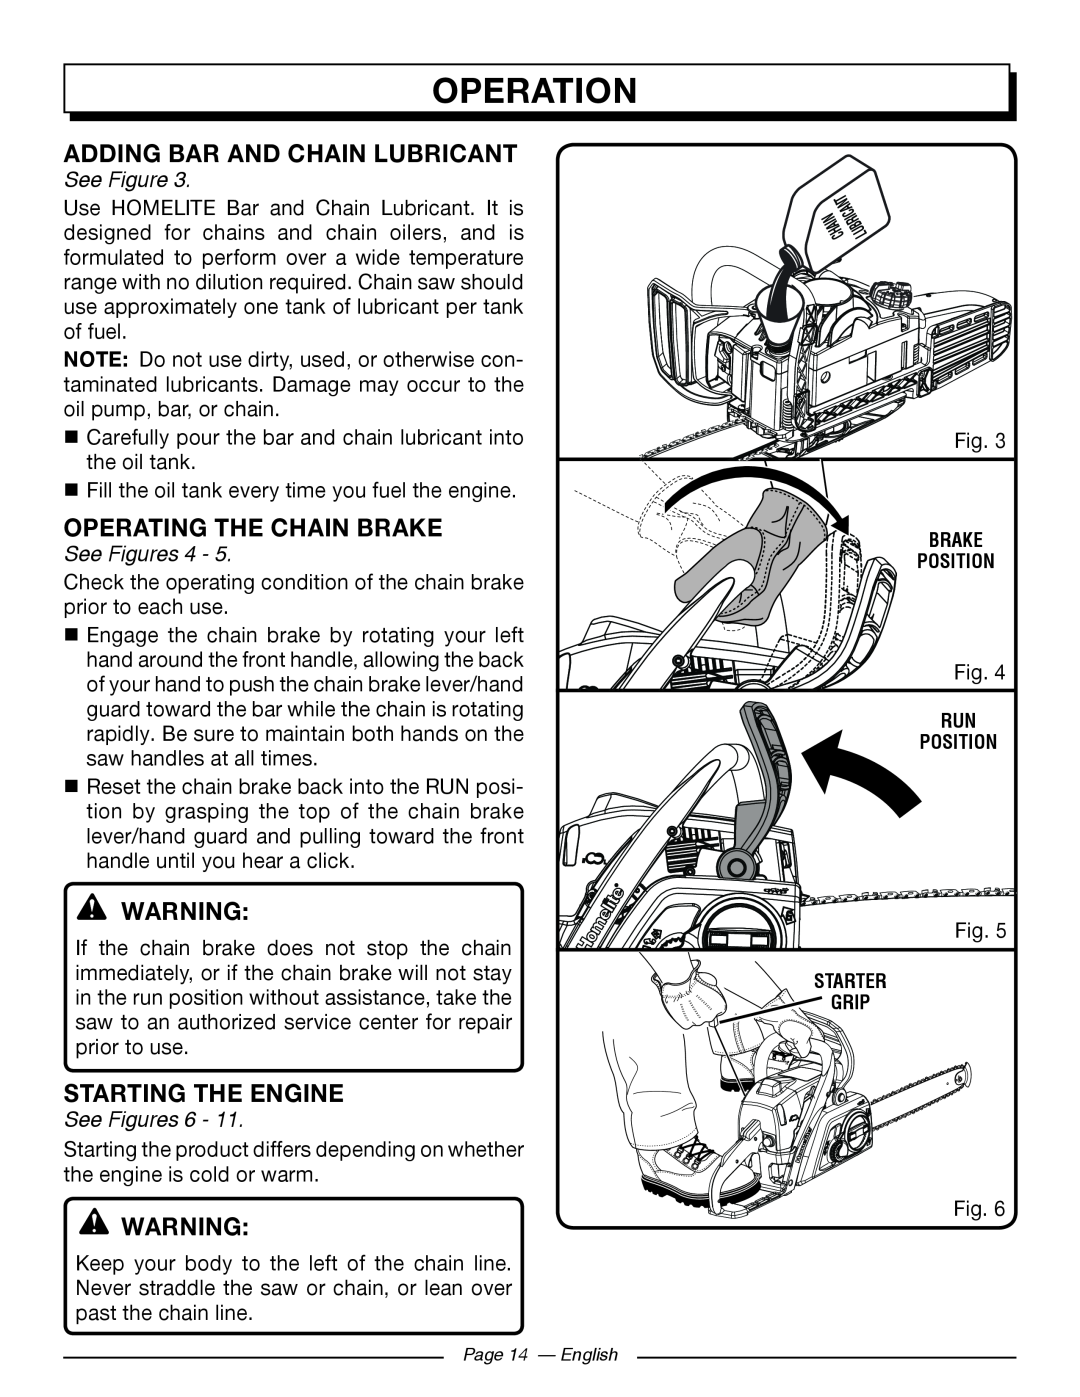 Homelite UT10582 operation, ADDING bar and chain lubricant, Operating The Chain Brake, Starting The Engine, See Figure 